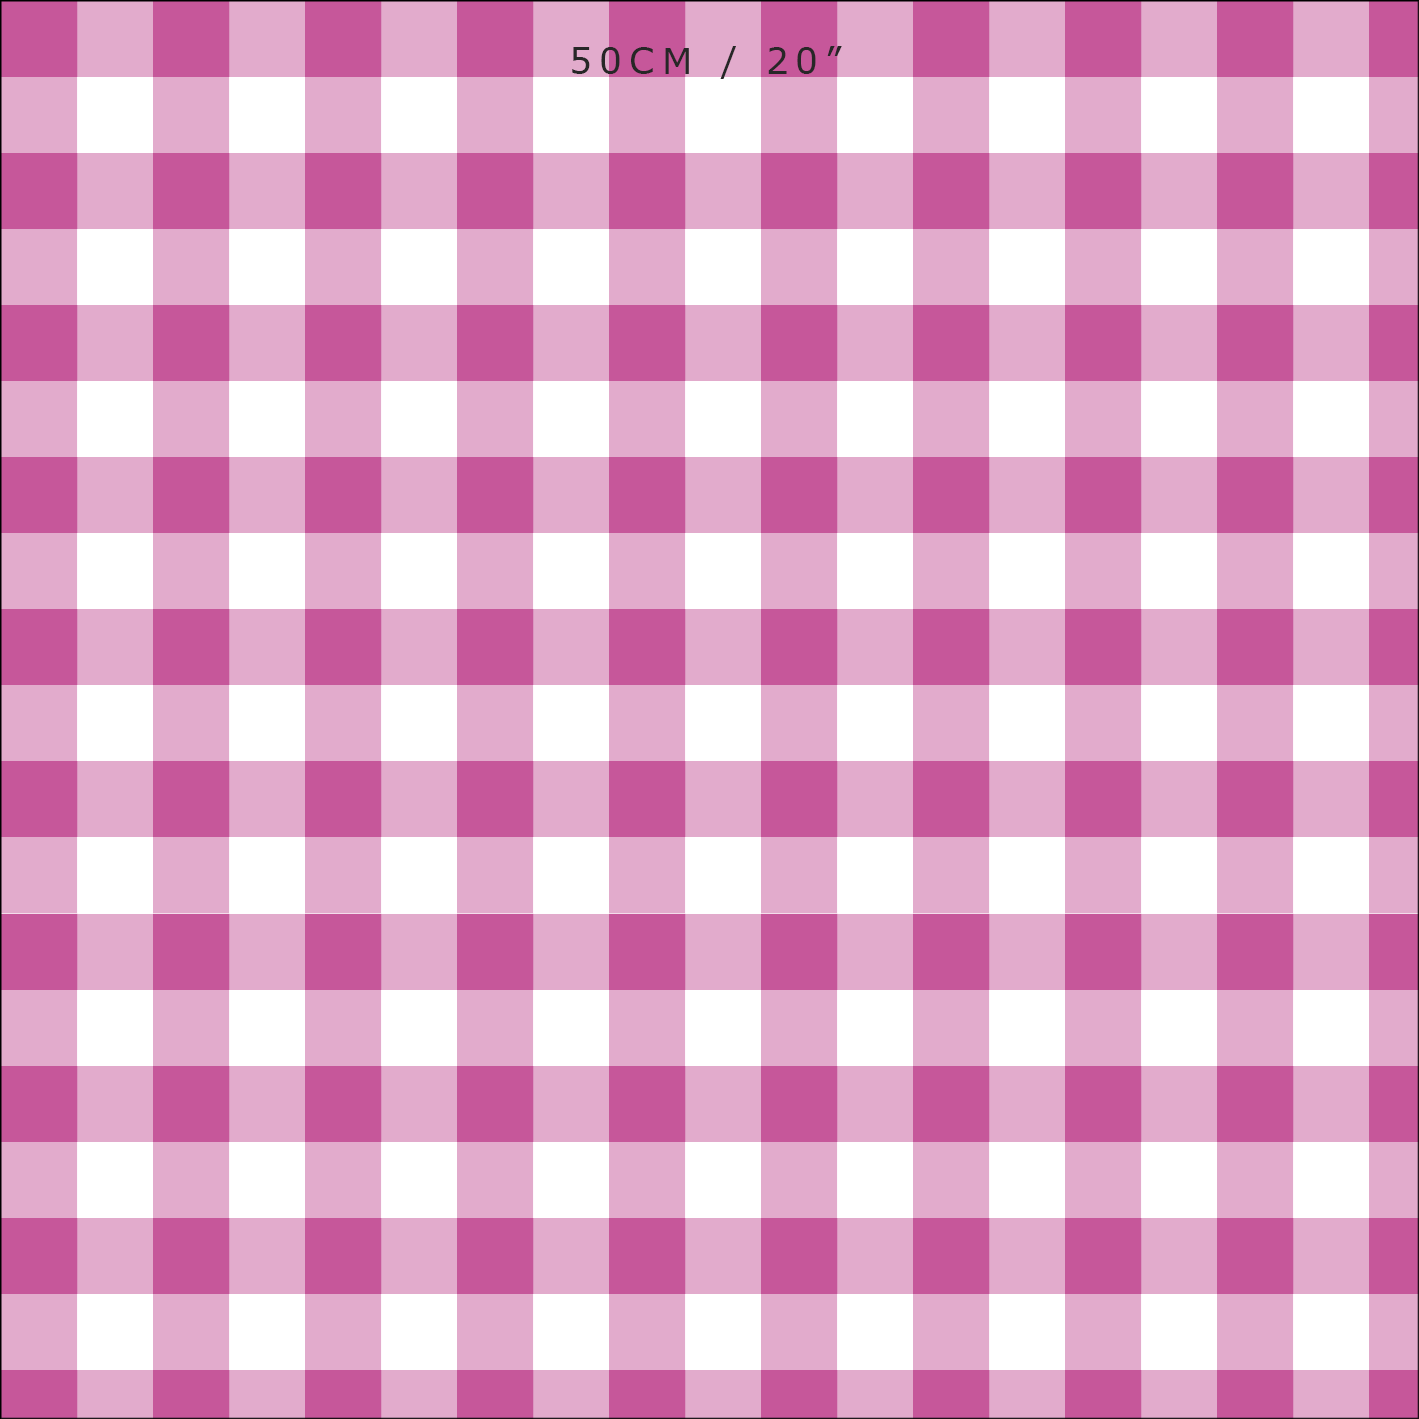 Hot Pink Gingham check on7/8 white single face satin, 10 yards